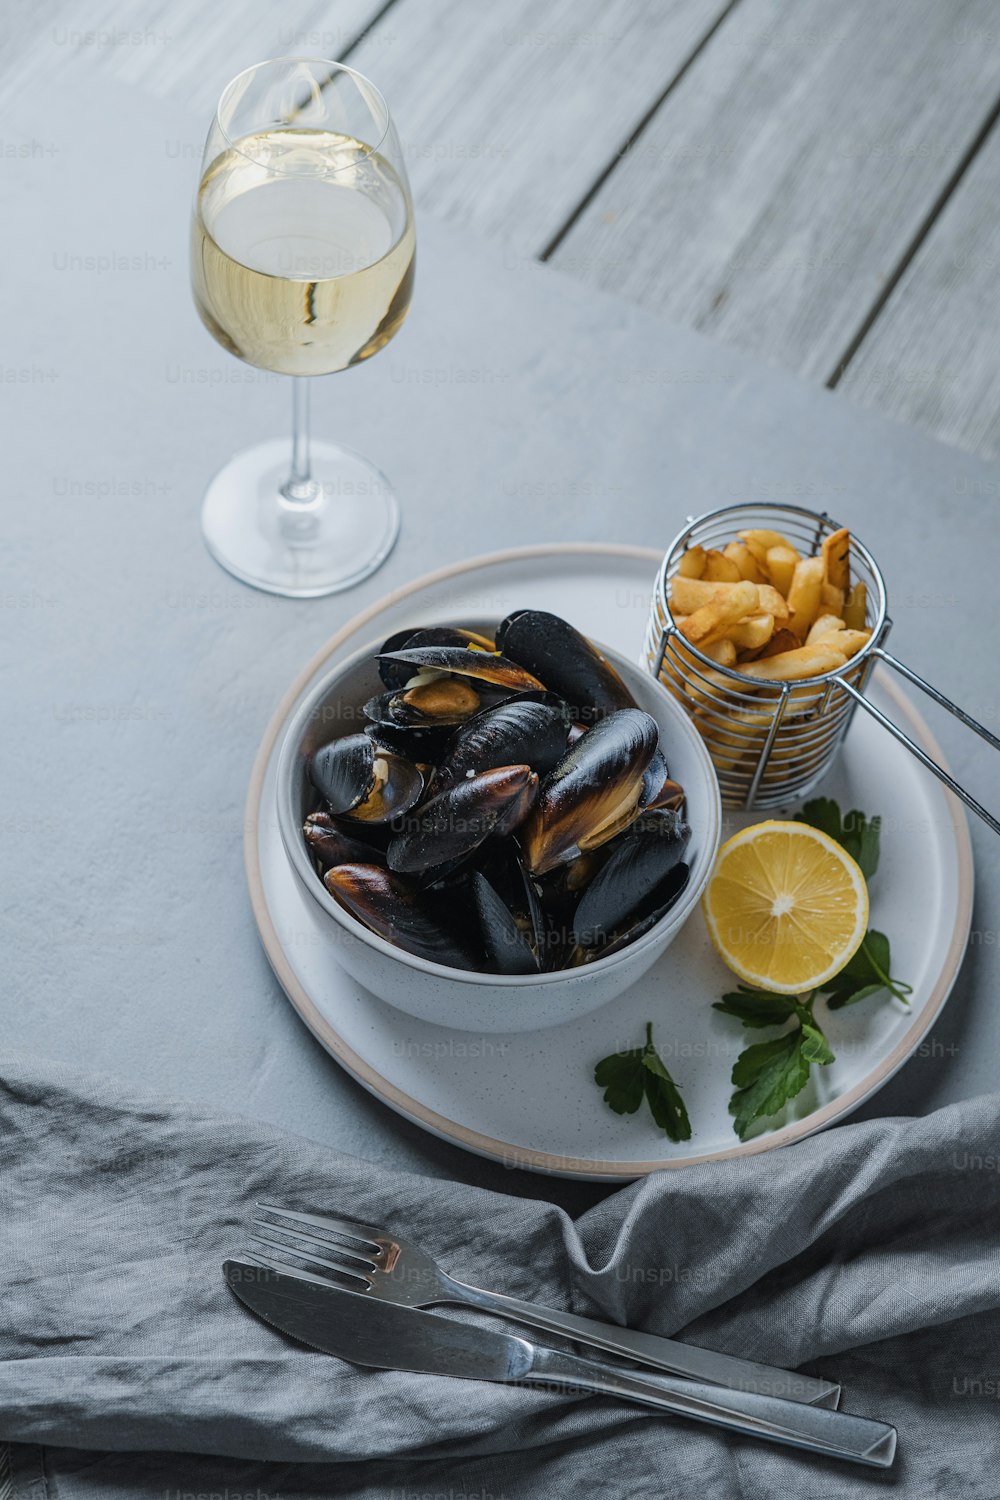 a plate of mussels and a glass of wine